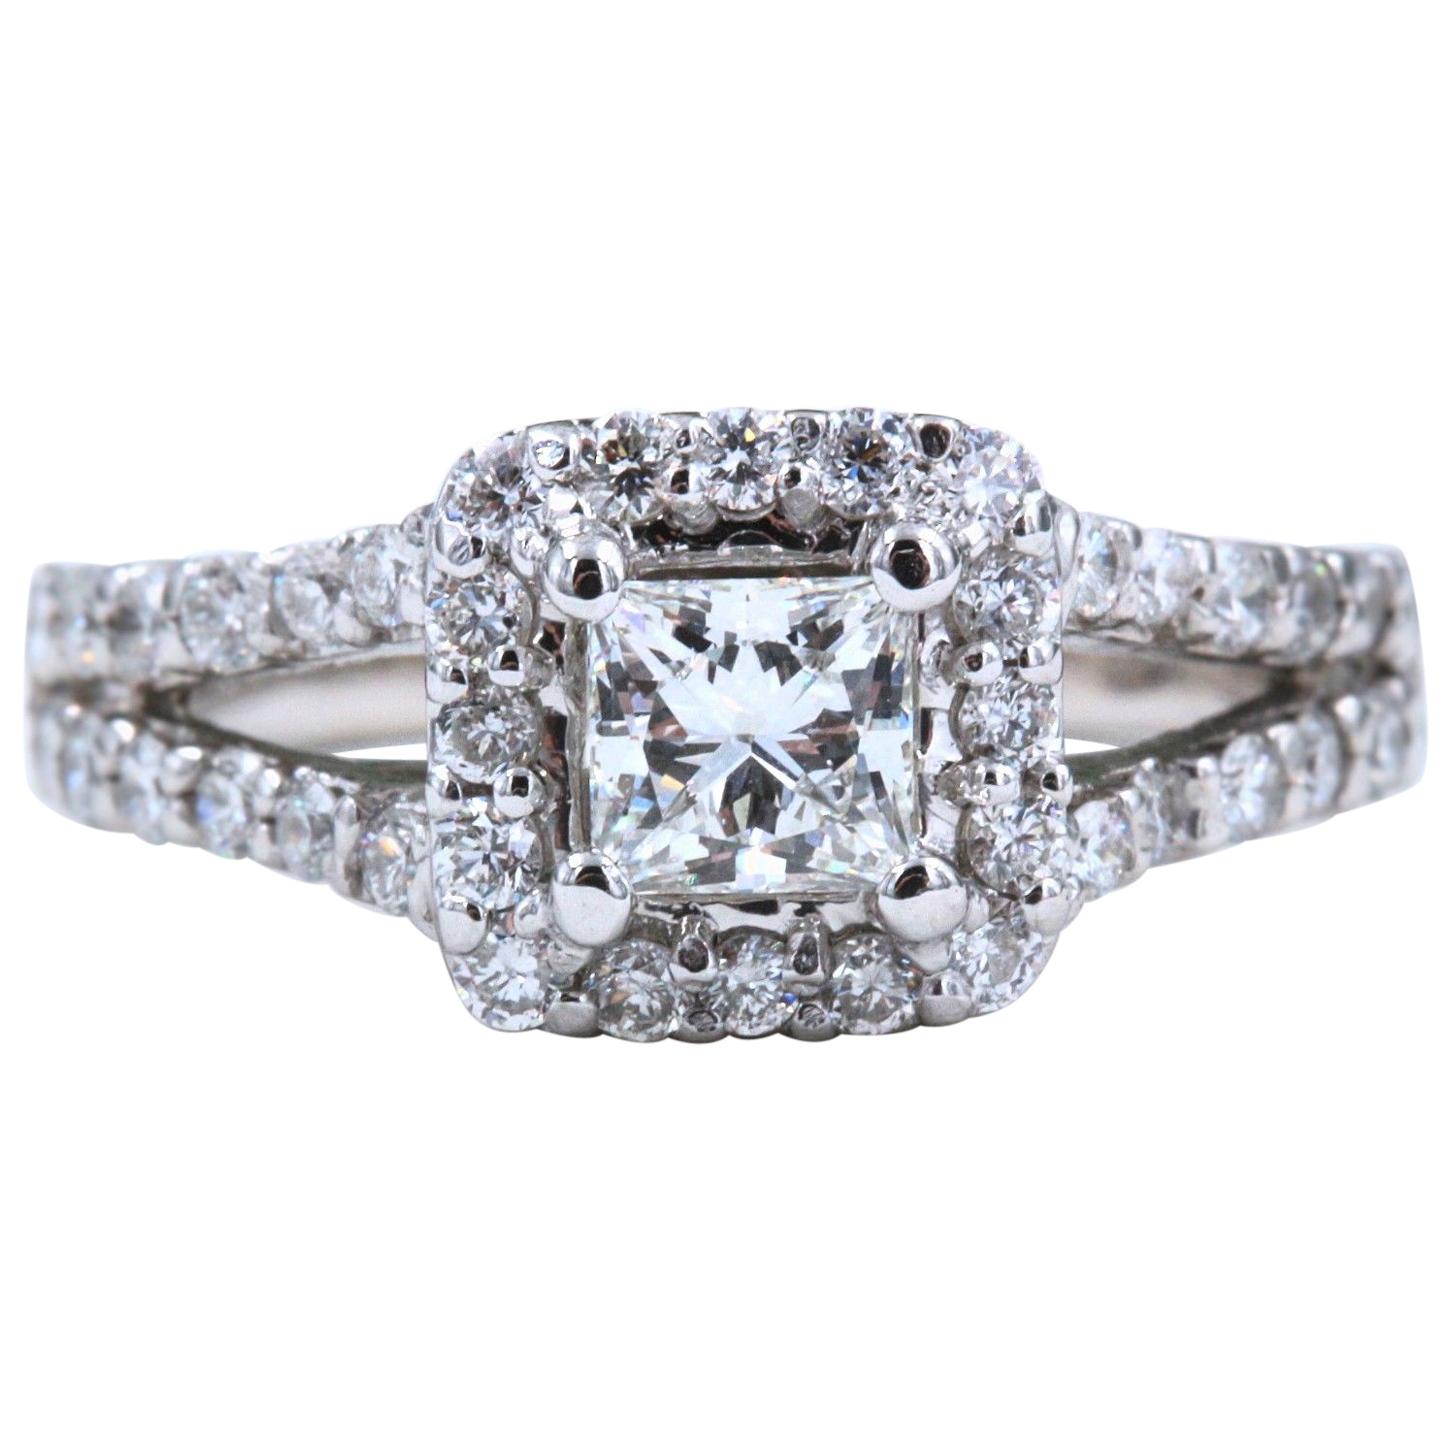 Choosing the Right Engagement Ring For You With Helzberg Diamonds!